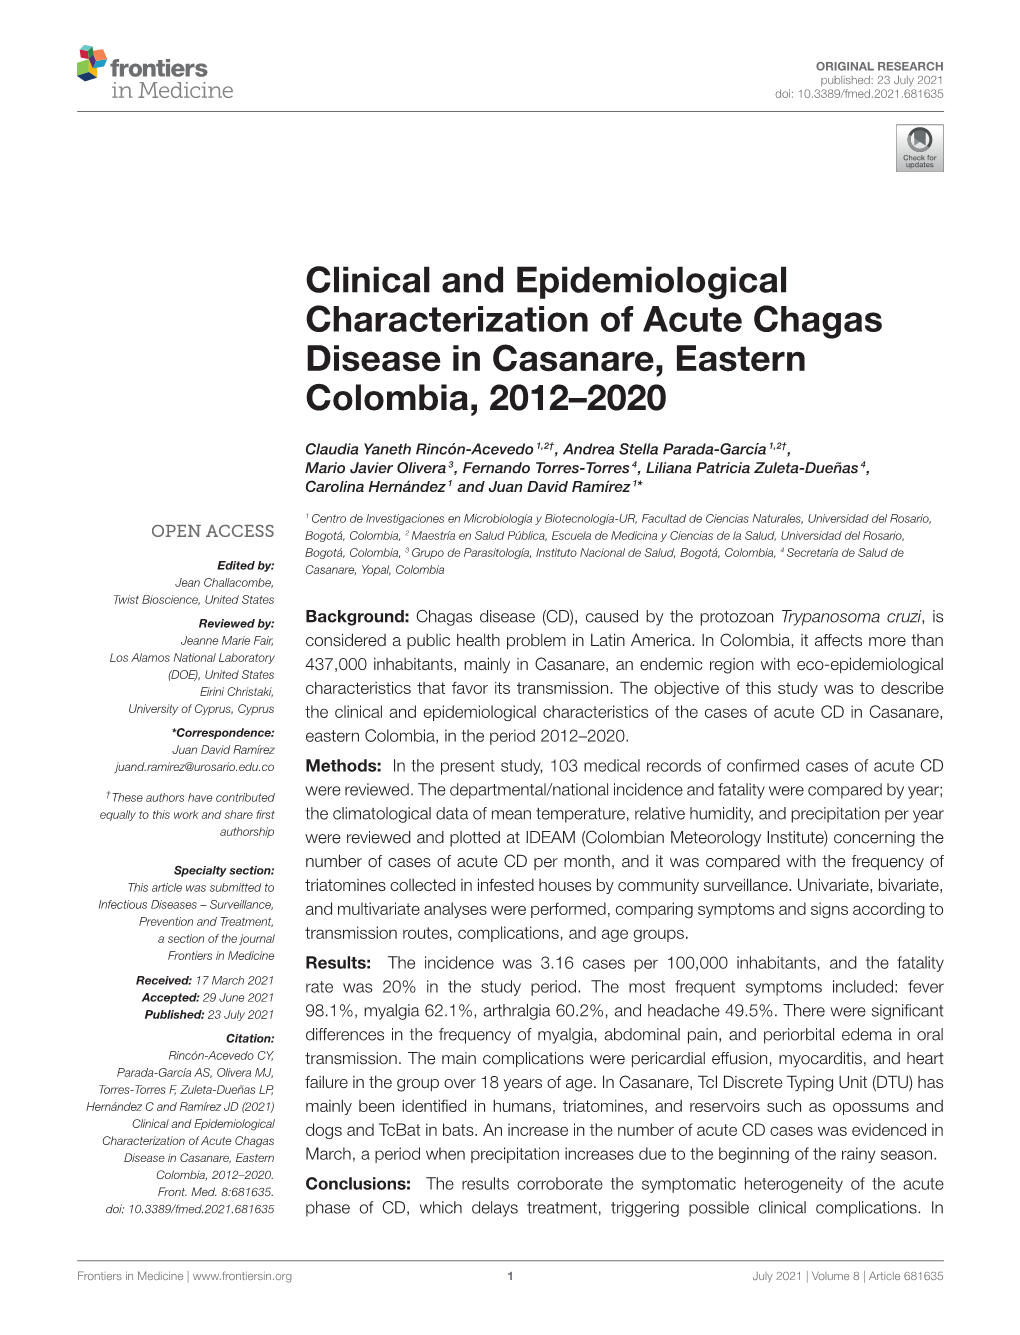 Clinical and Epidemiological Characterization of Acute Chagas Disease in Casanare, Eastern Colombia, 2012–2020